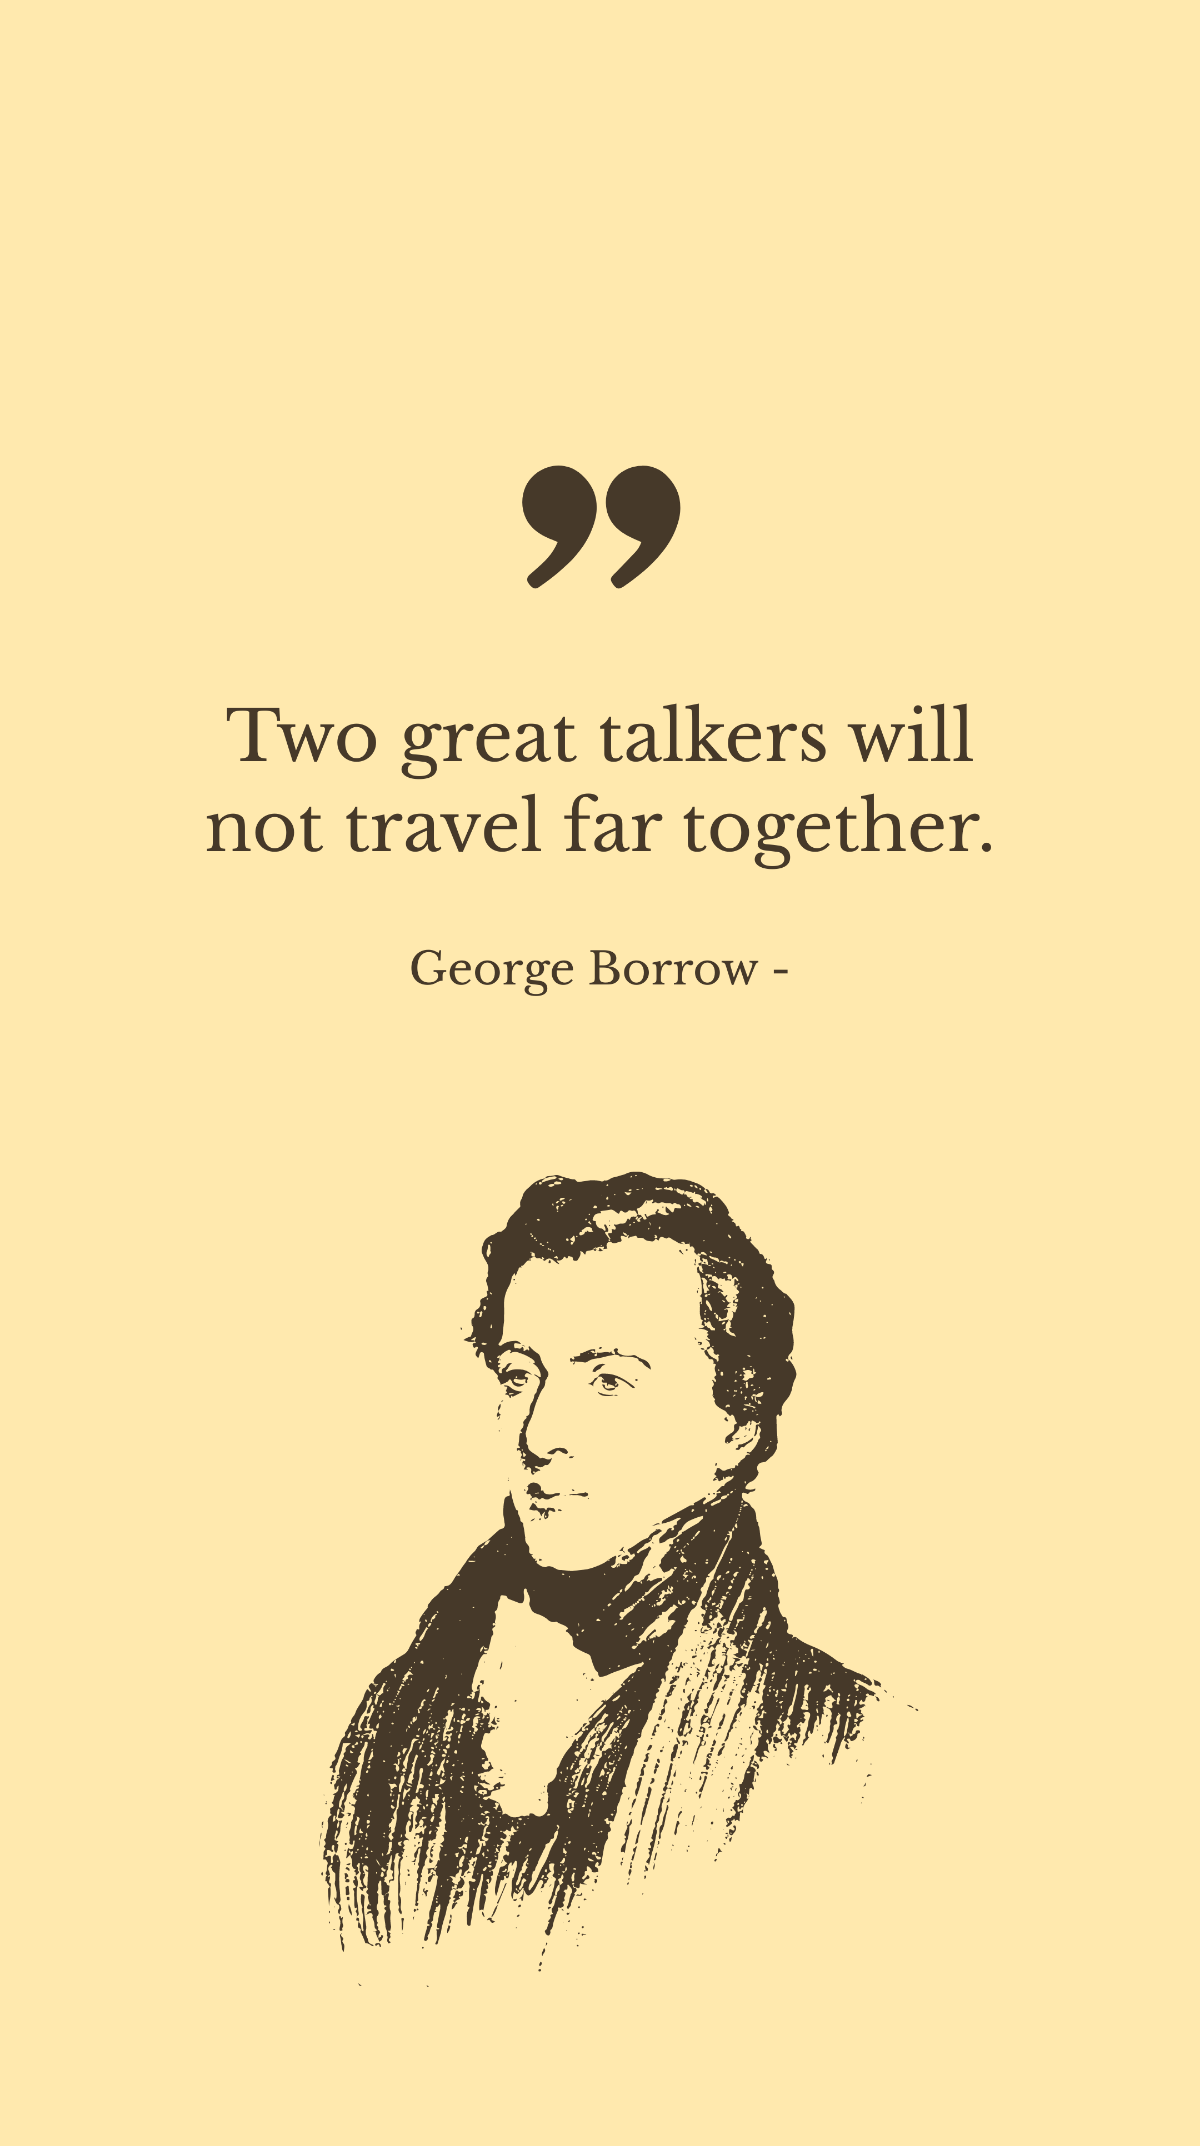 Free George Borrow - Two great talkers will not travel far together. Template